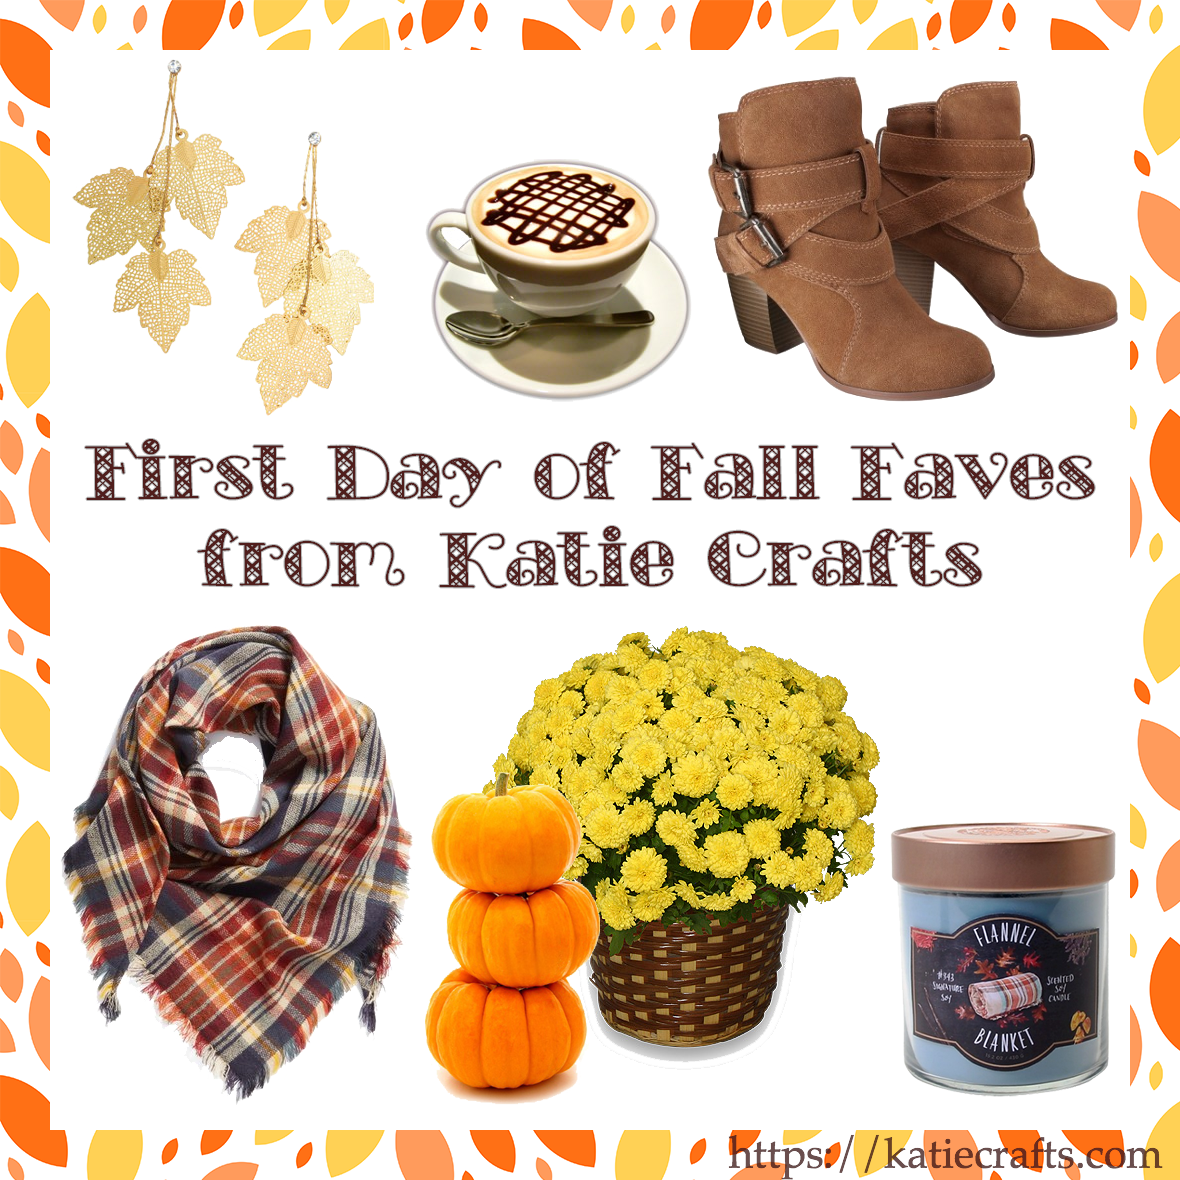 First Day of Fall Faves by Katie Crafts; https://www.katiecrafts.com